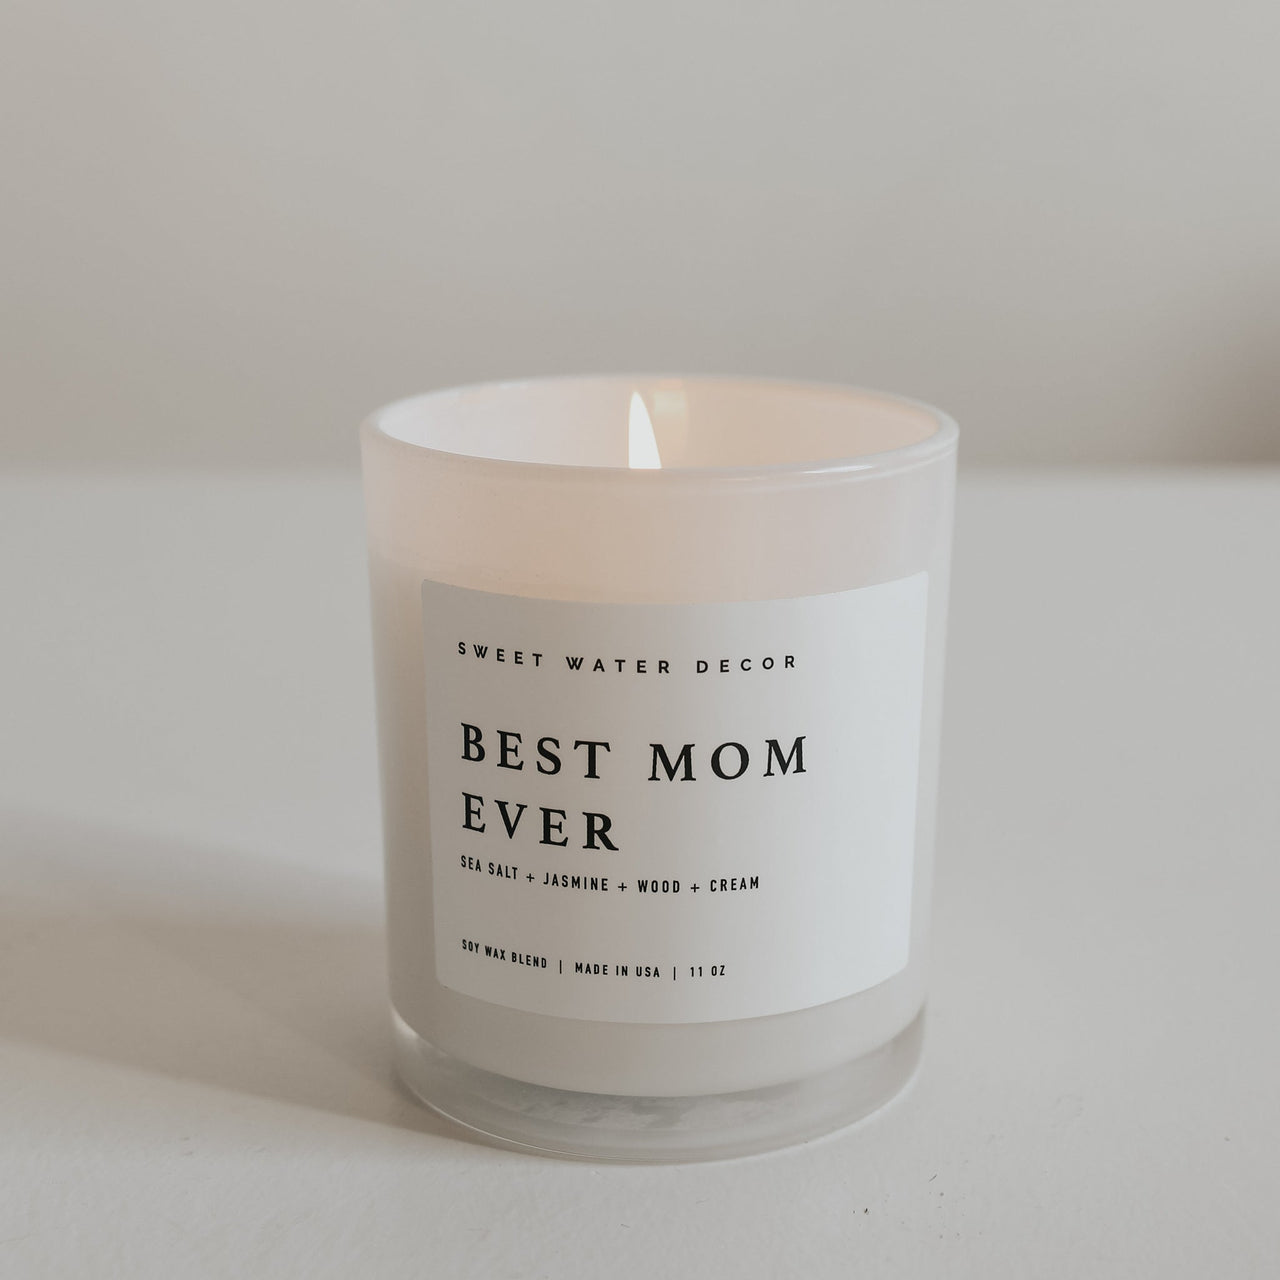 Best Mom Ever Soy Candle - White Jar - 11 oz - Tony's Home Furnishings